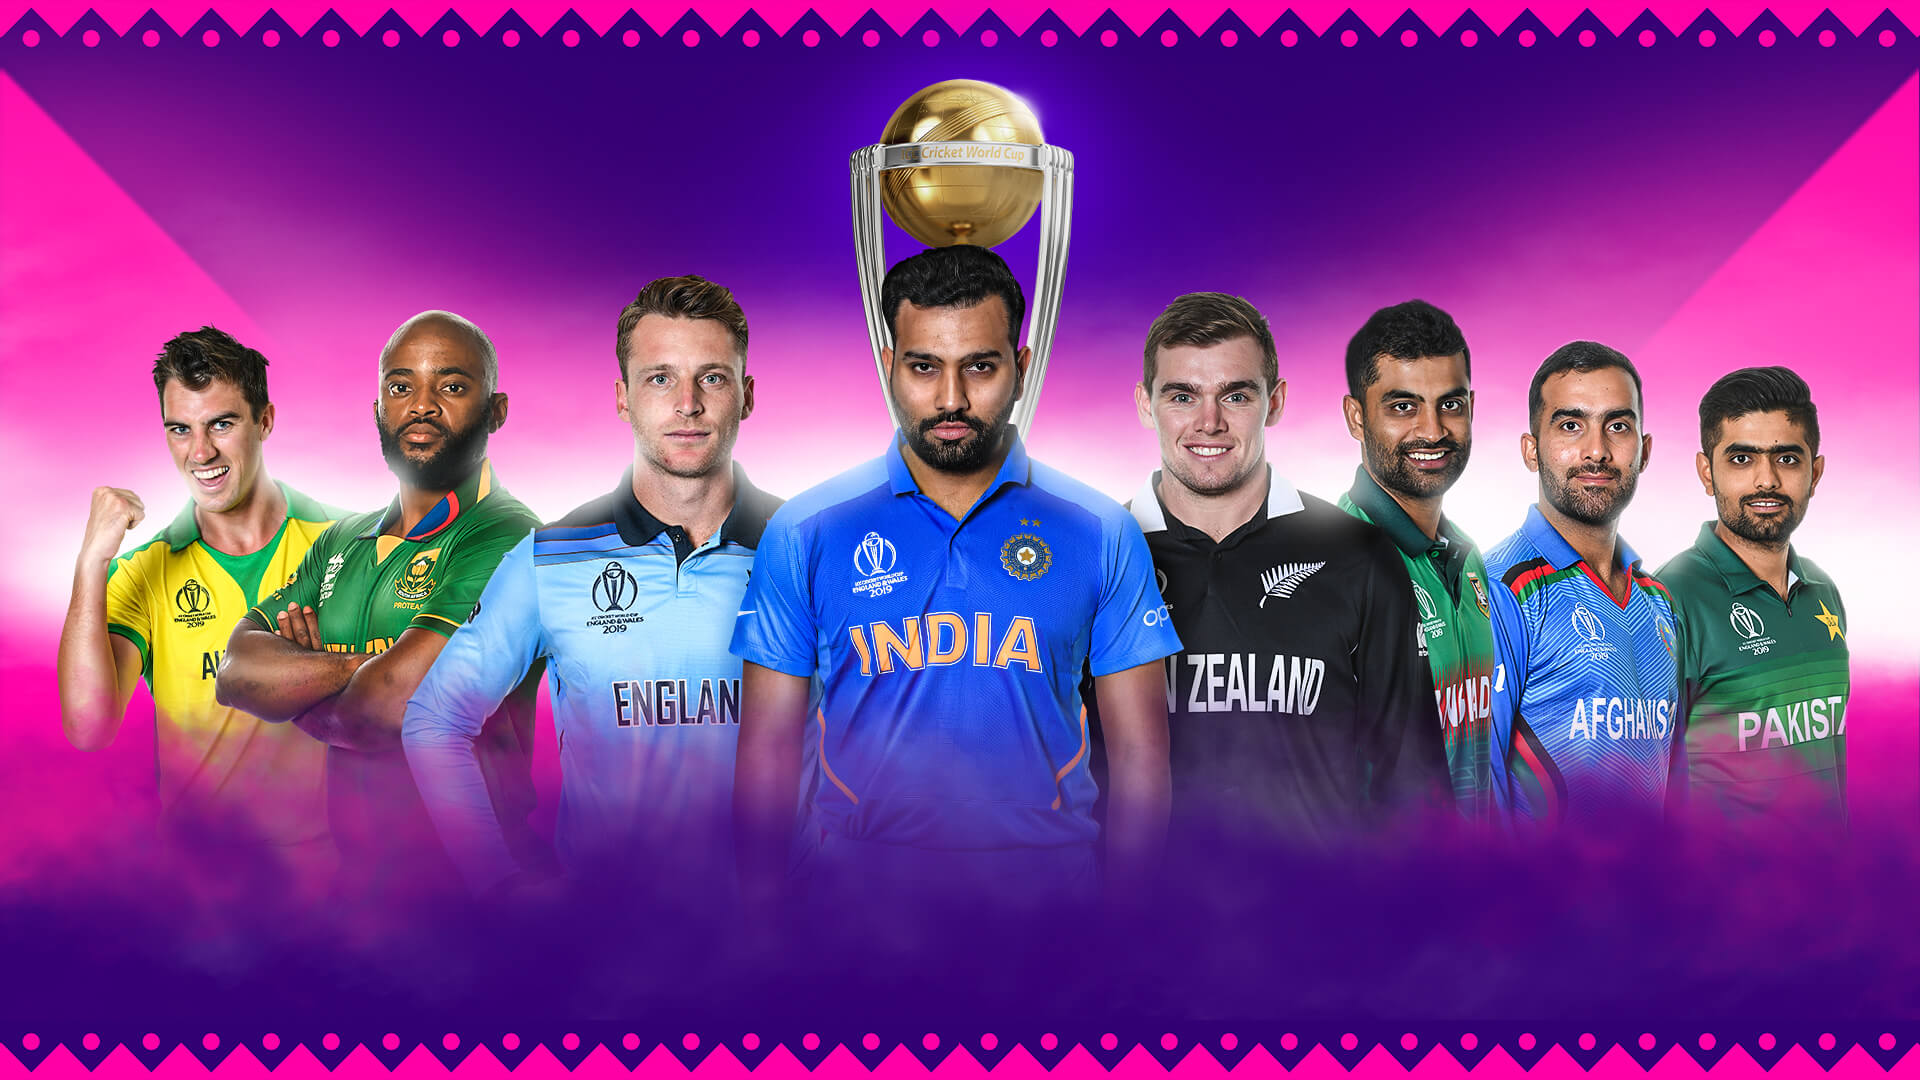 world t20 live streaming